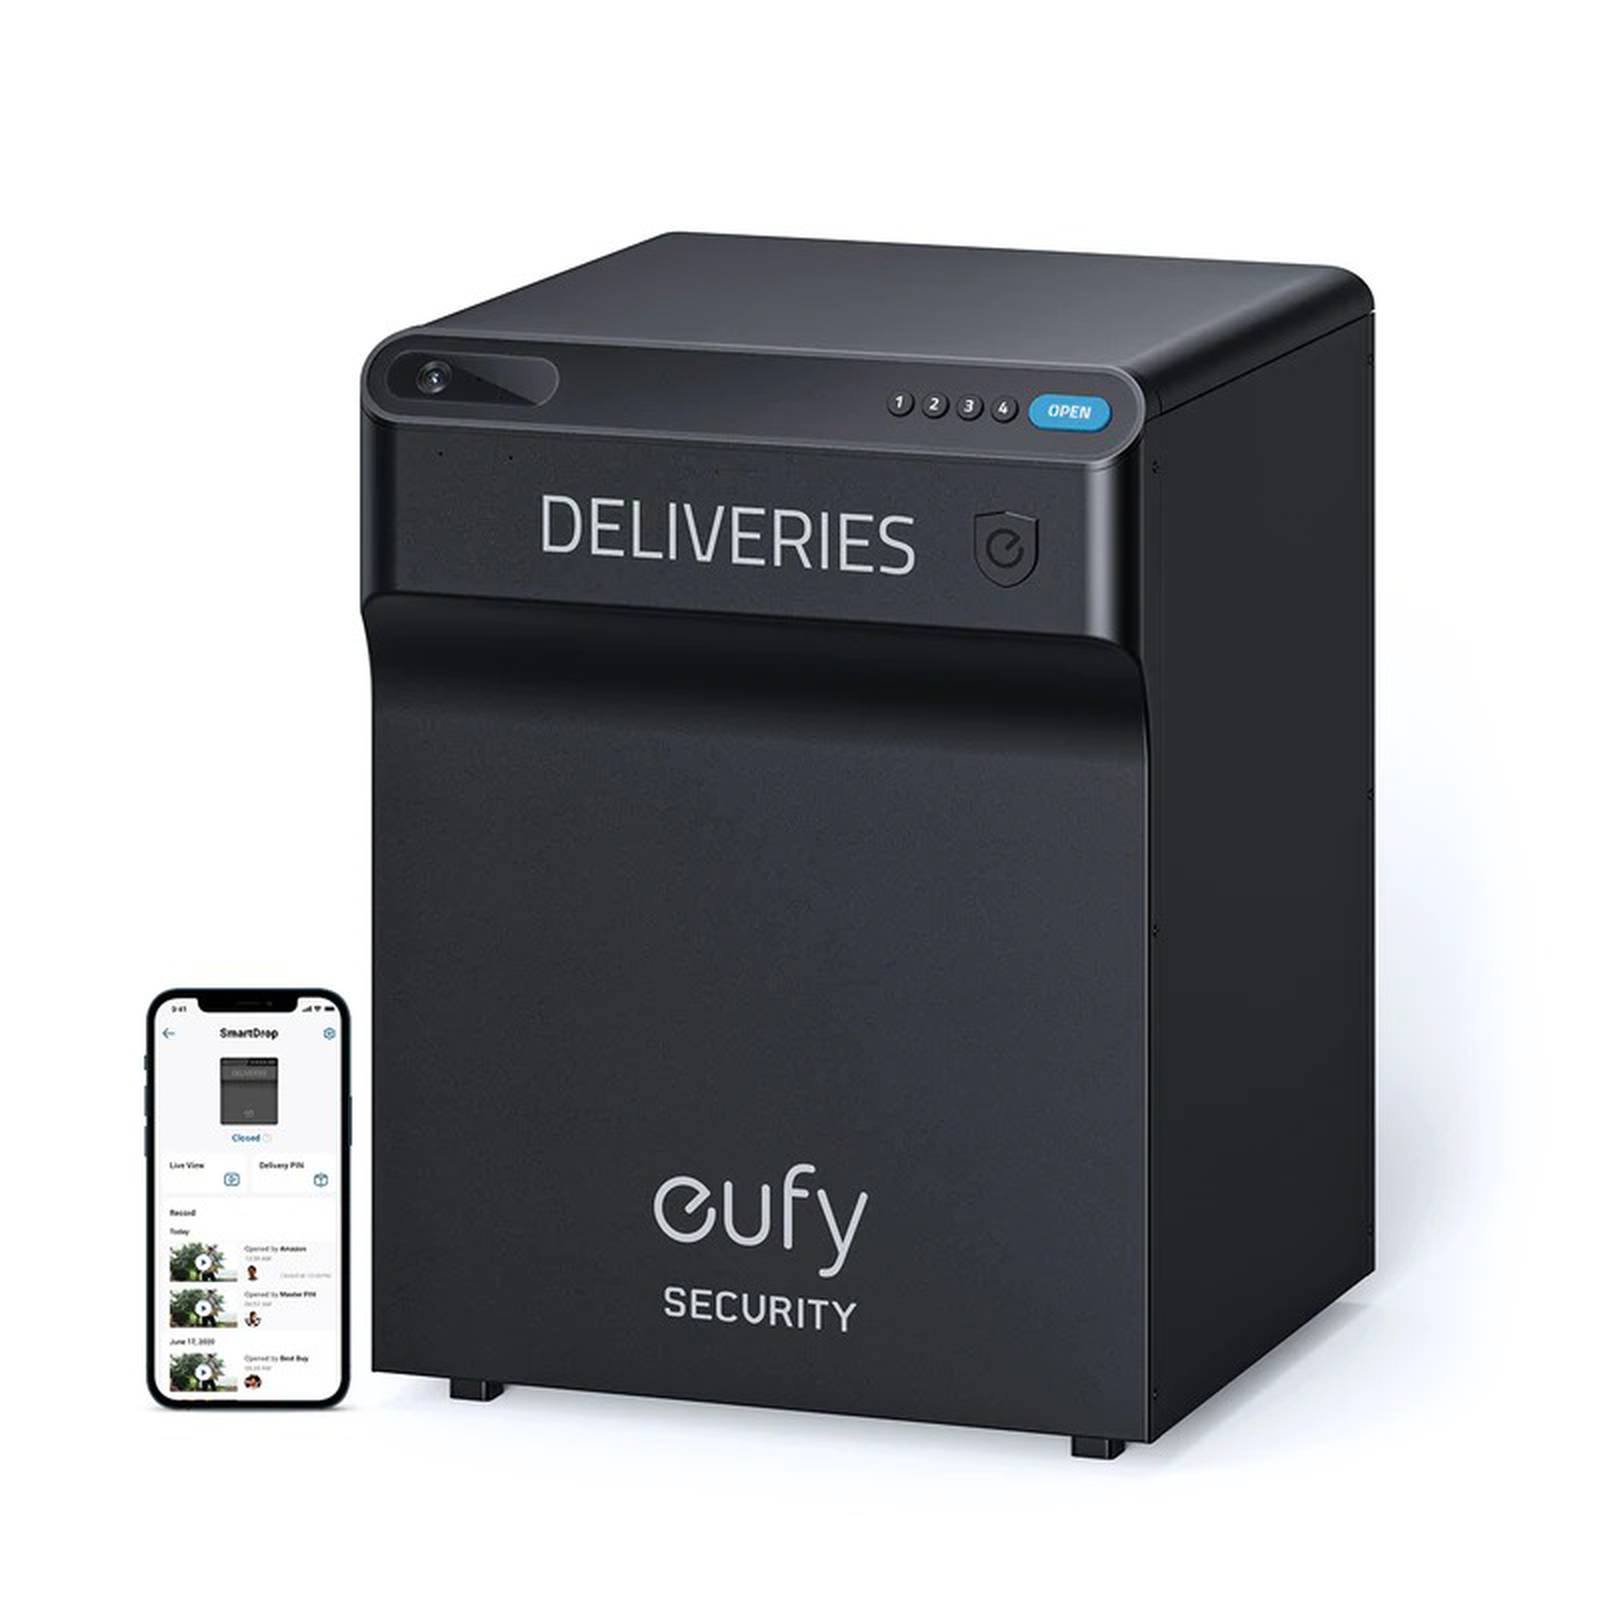 Eufy SmartDrop is a smart postbox